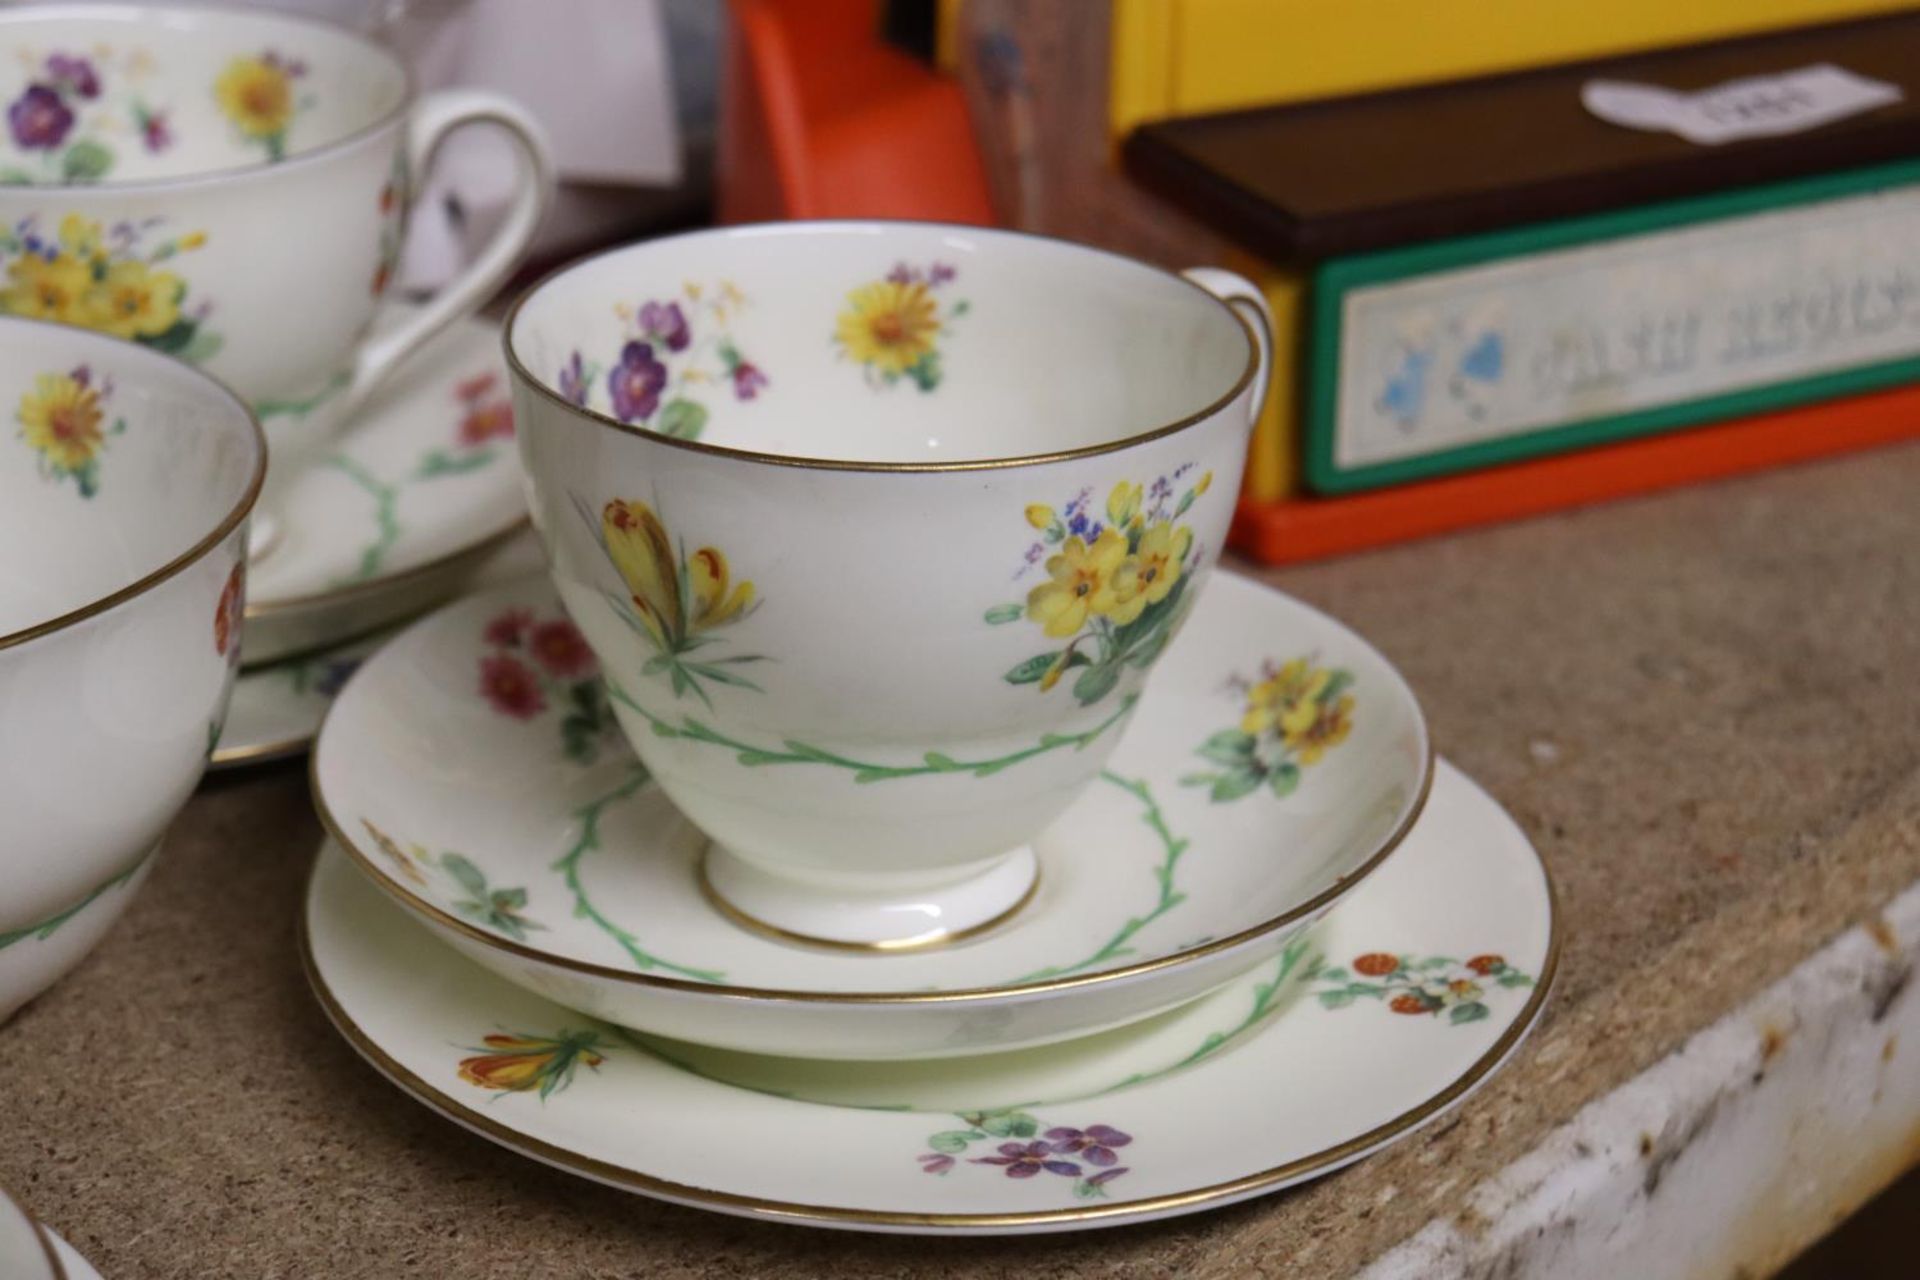 A VINTAGE ROYAL DOULTON TEASET, PALE YELLOW WITH SPRING FLOWERS, TO INCLUDE A CREAM JUG, SUGAR BOWL, - Image 4 of 6